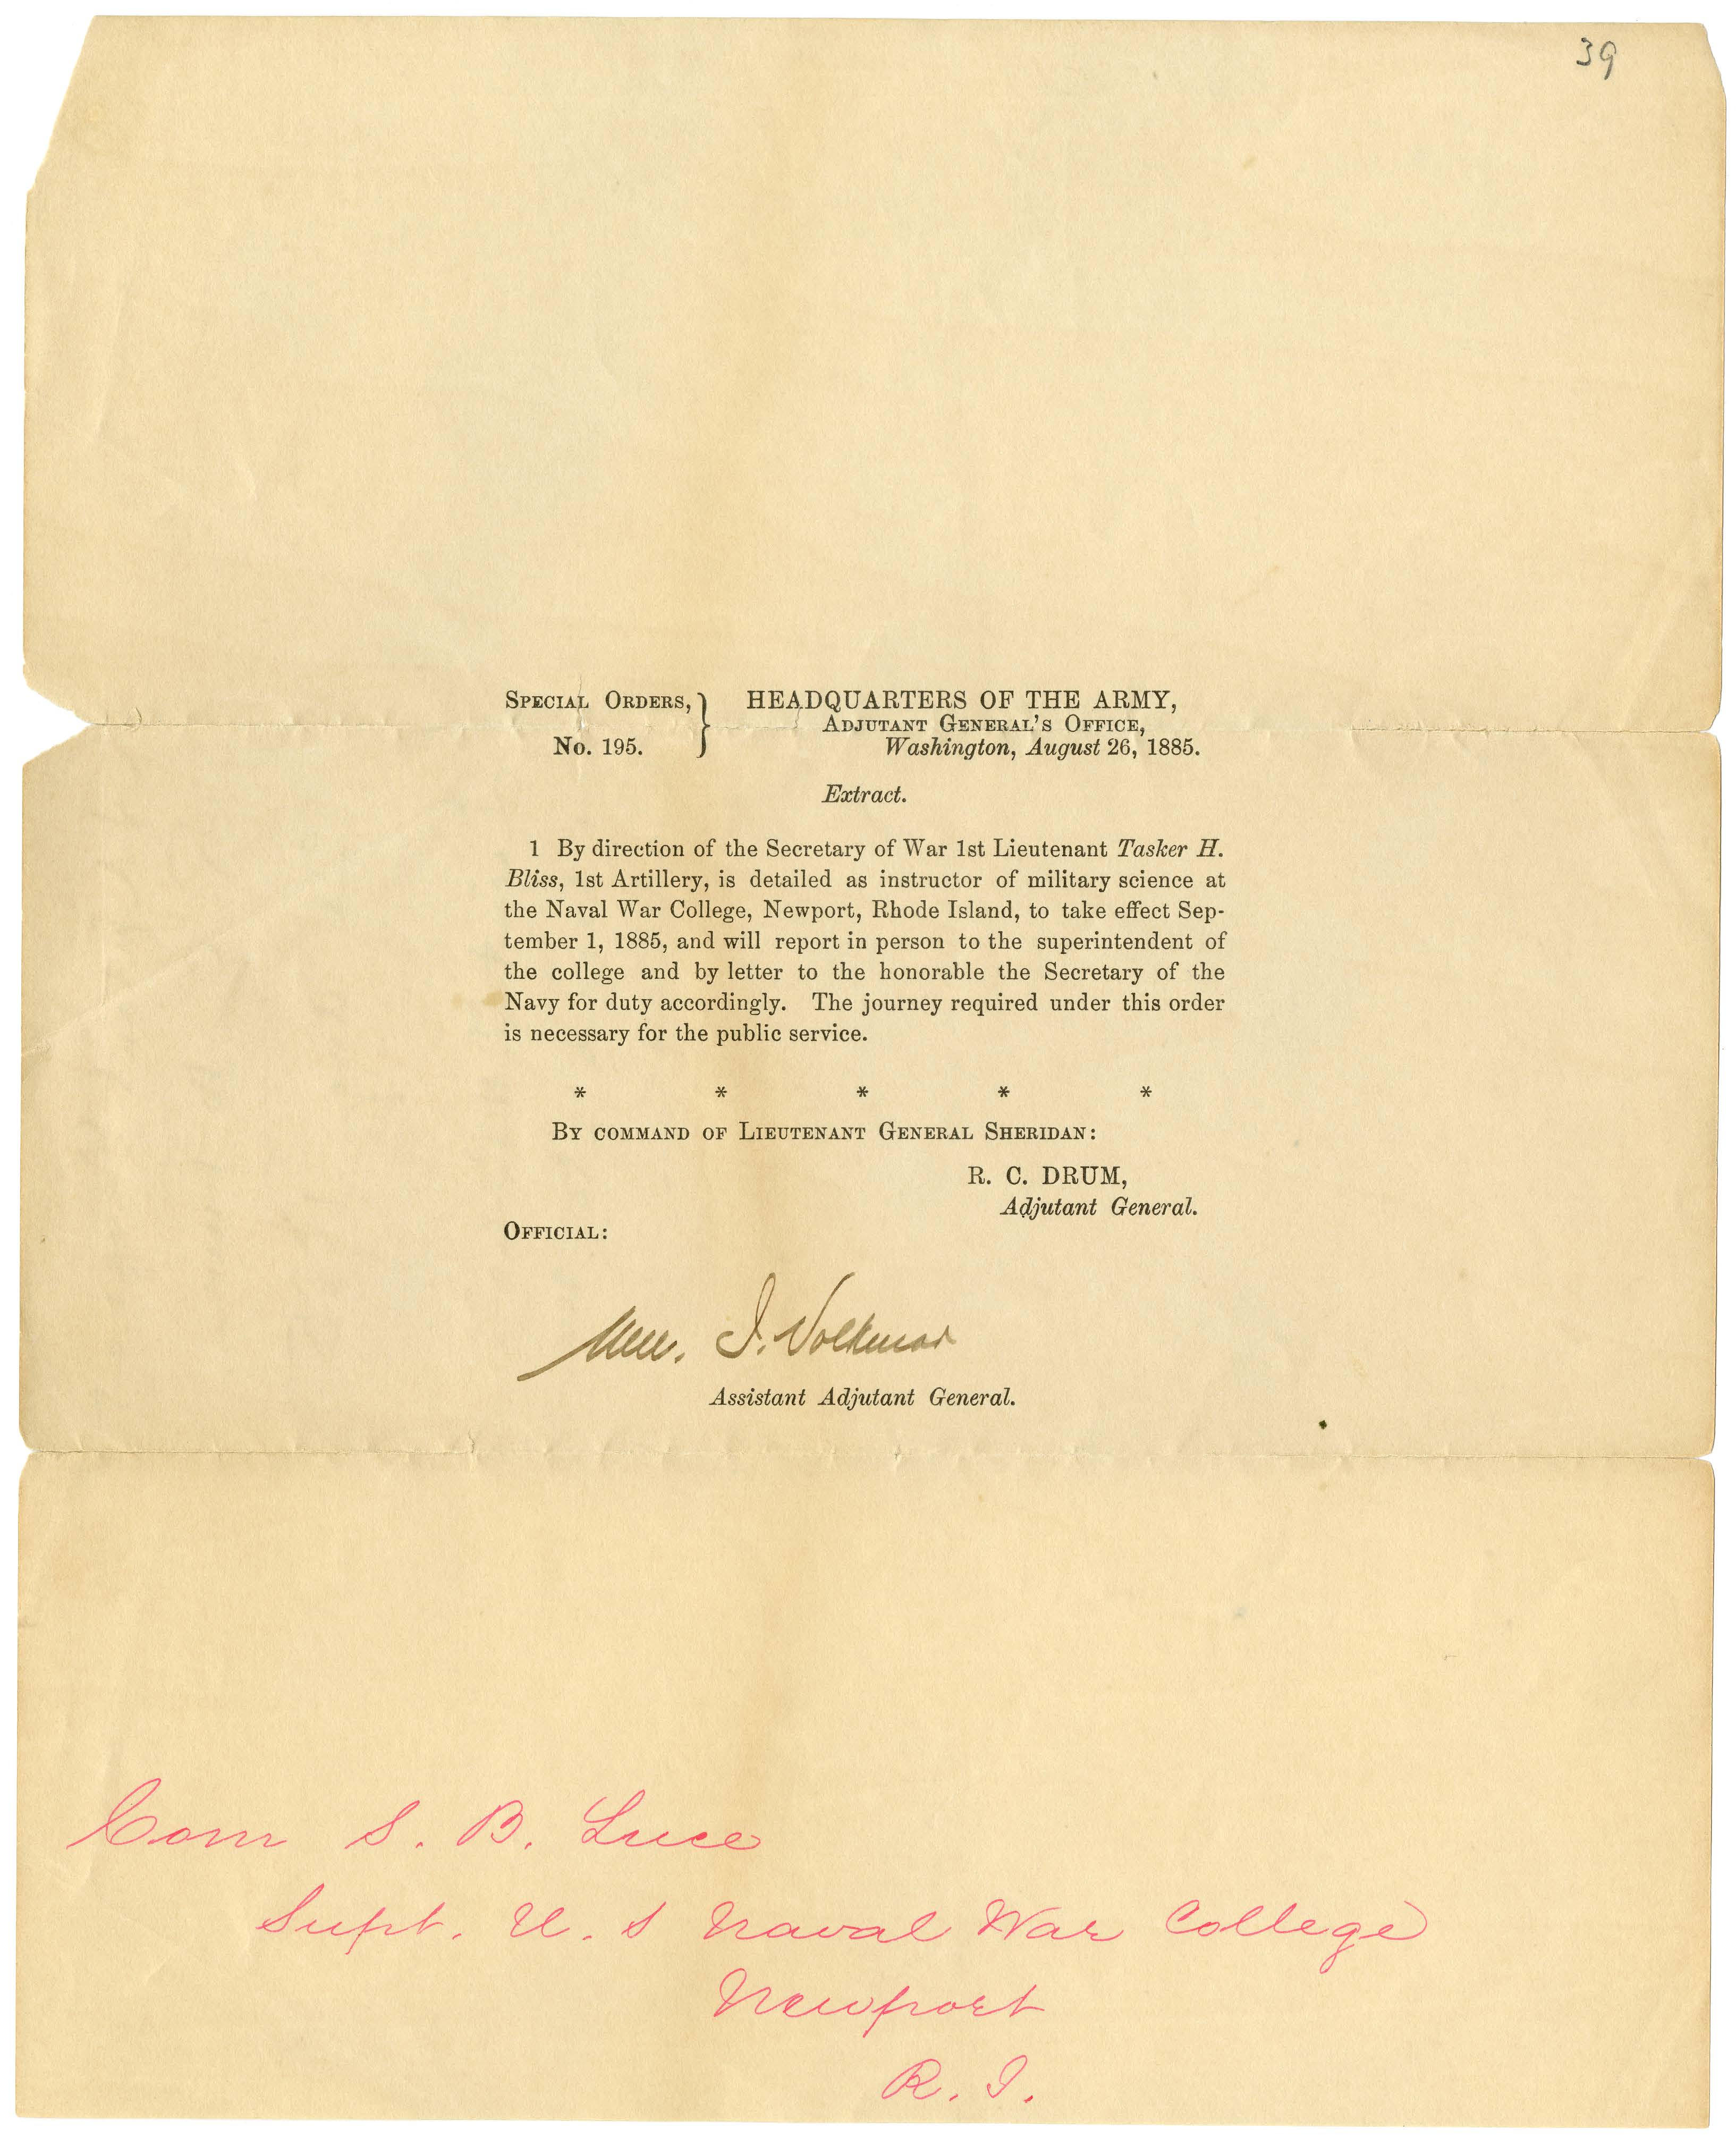 Special Order No. 195: Appointment of Army 1st Lieutenant Taker H. Bliss as instructor of military science at NWC